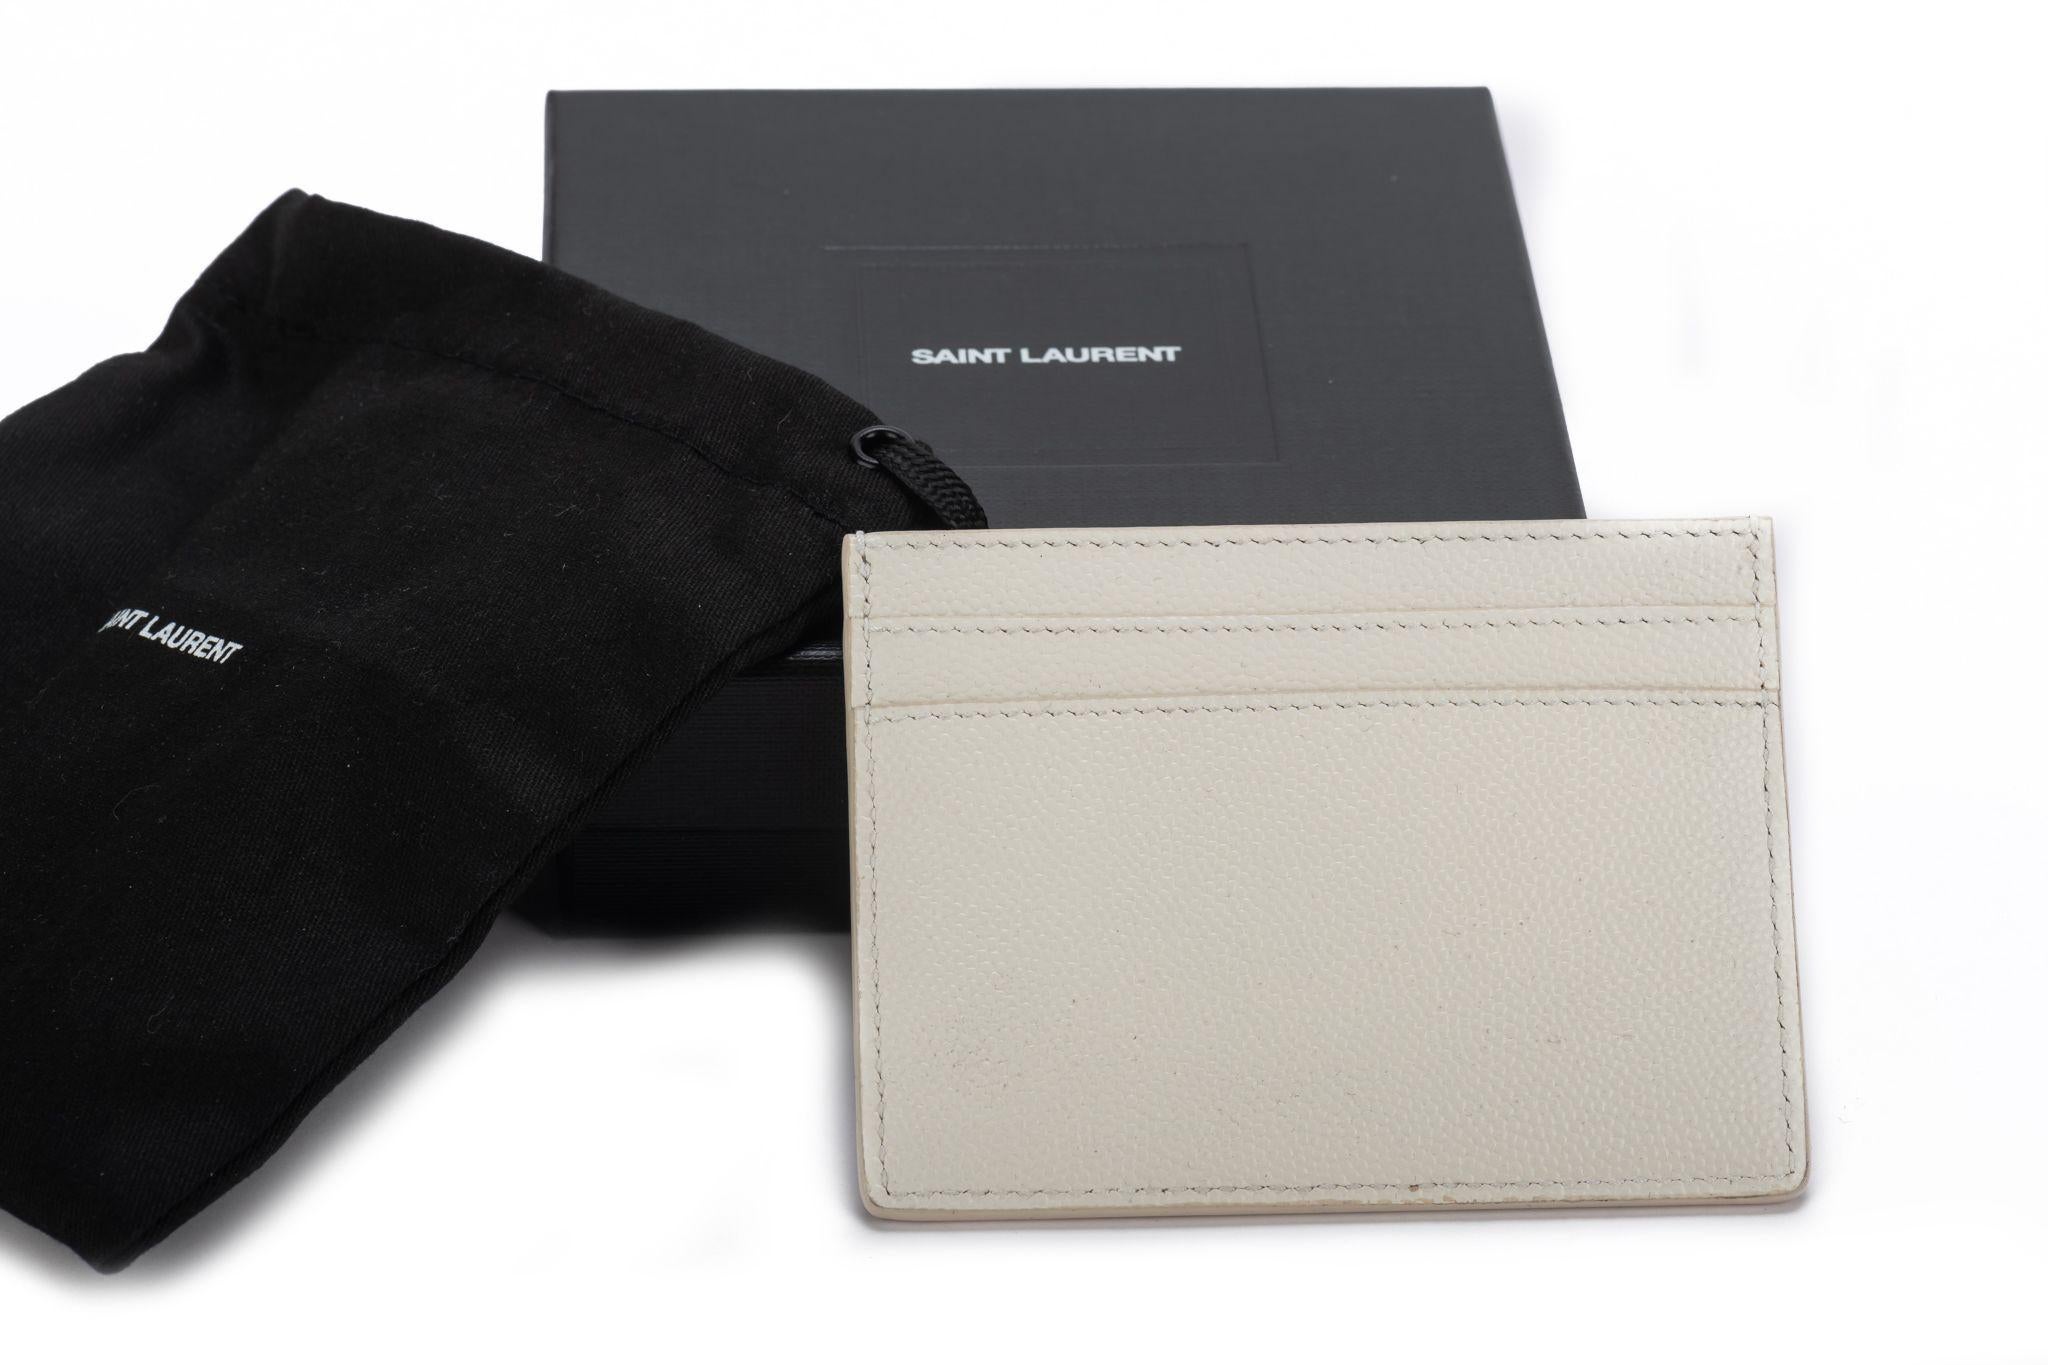 Yves Saint Laurent brand new white pebbled leather credit card case. Comes with booklet, original dust cover and box.